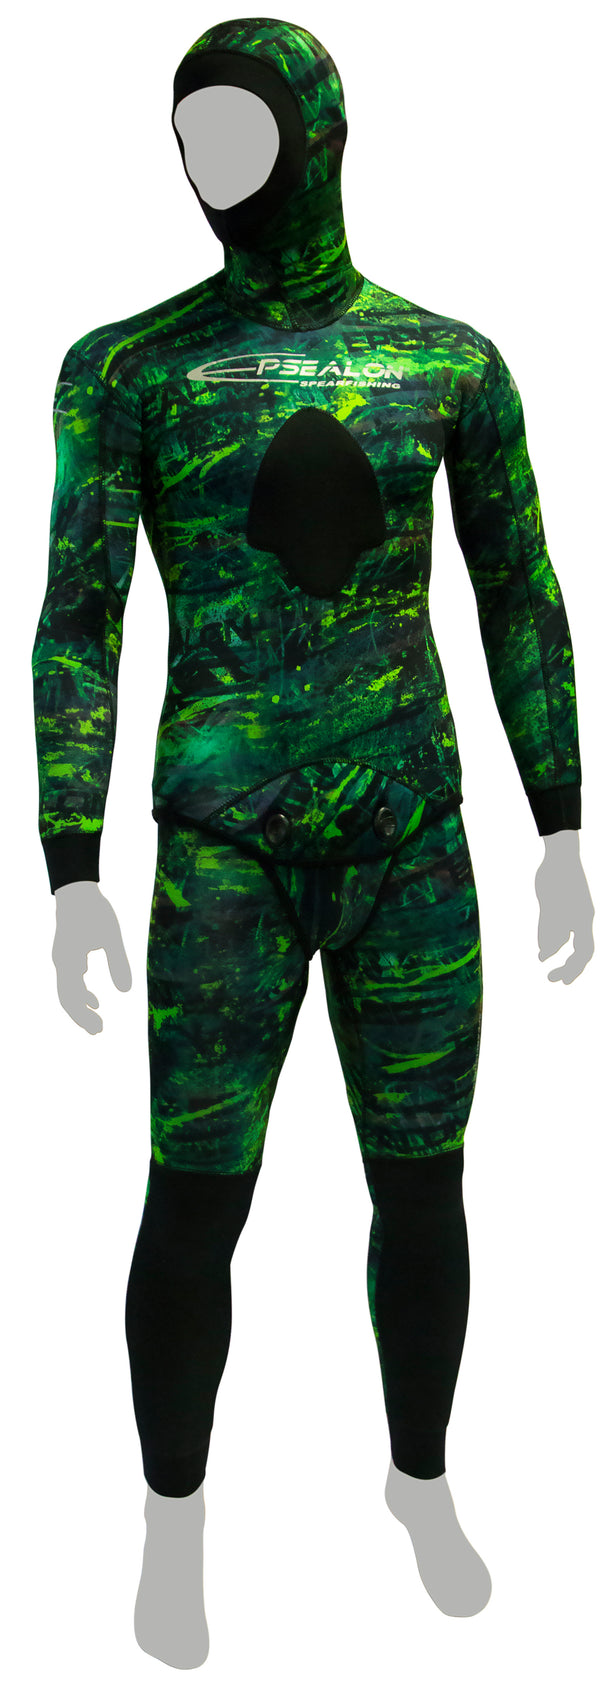 Epsealon Shadow spearfishing wetsuit 5 mm - Nootica - Water